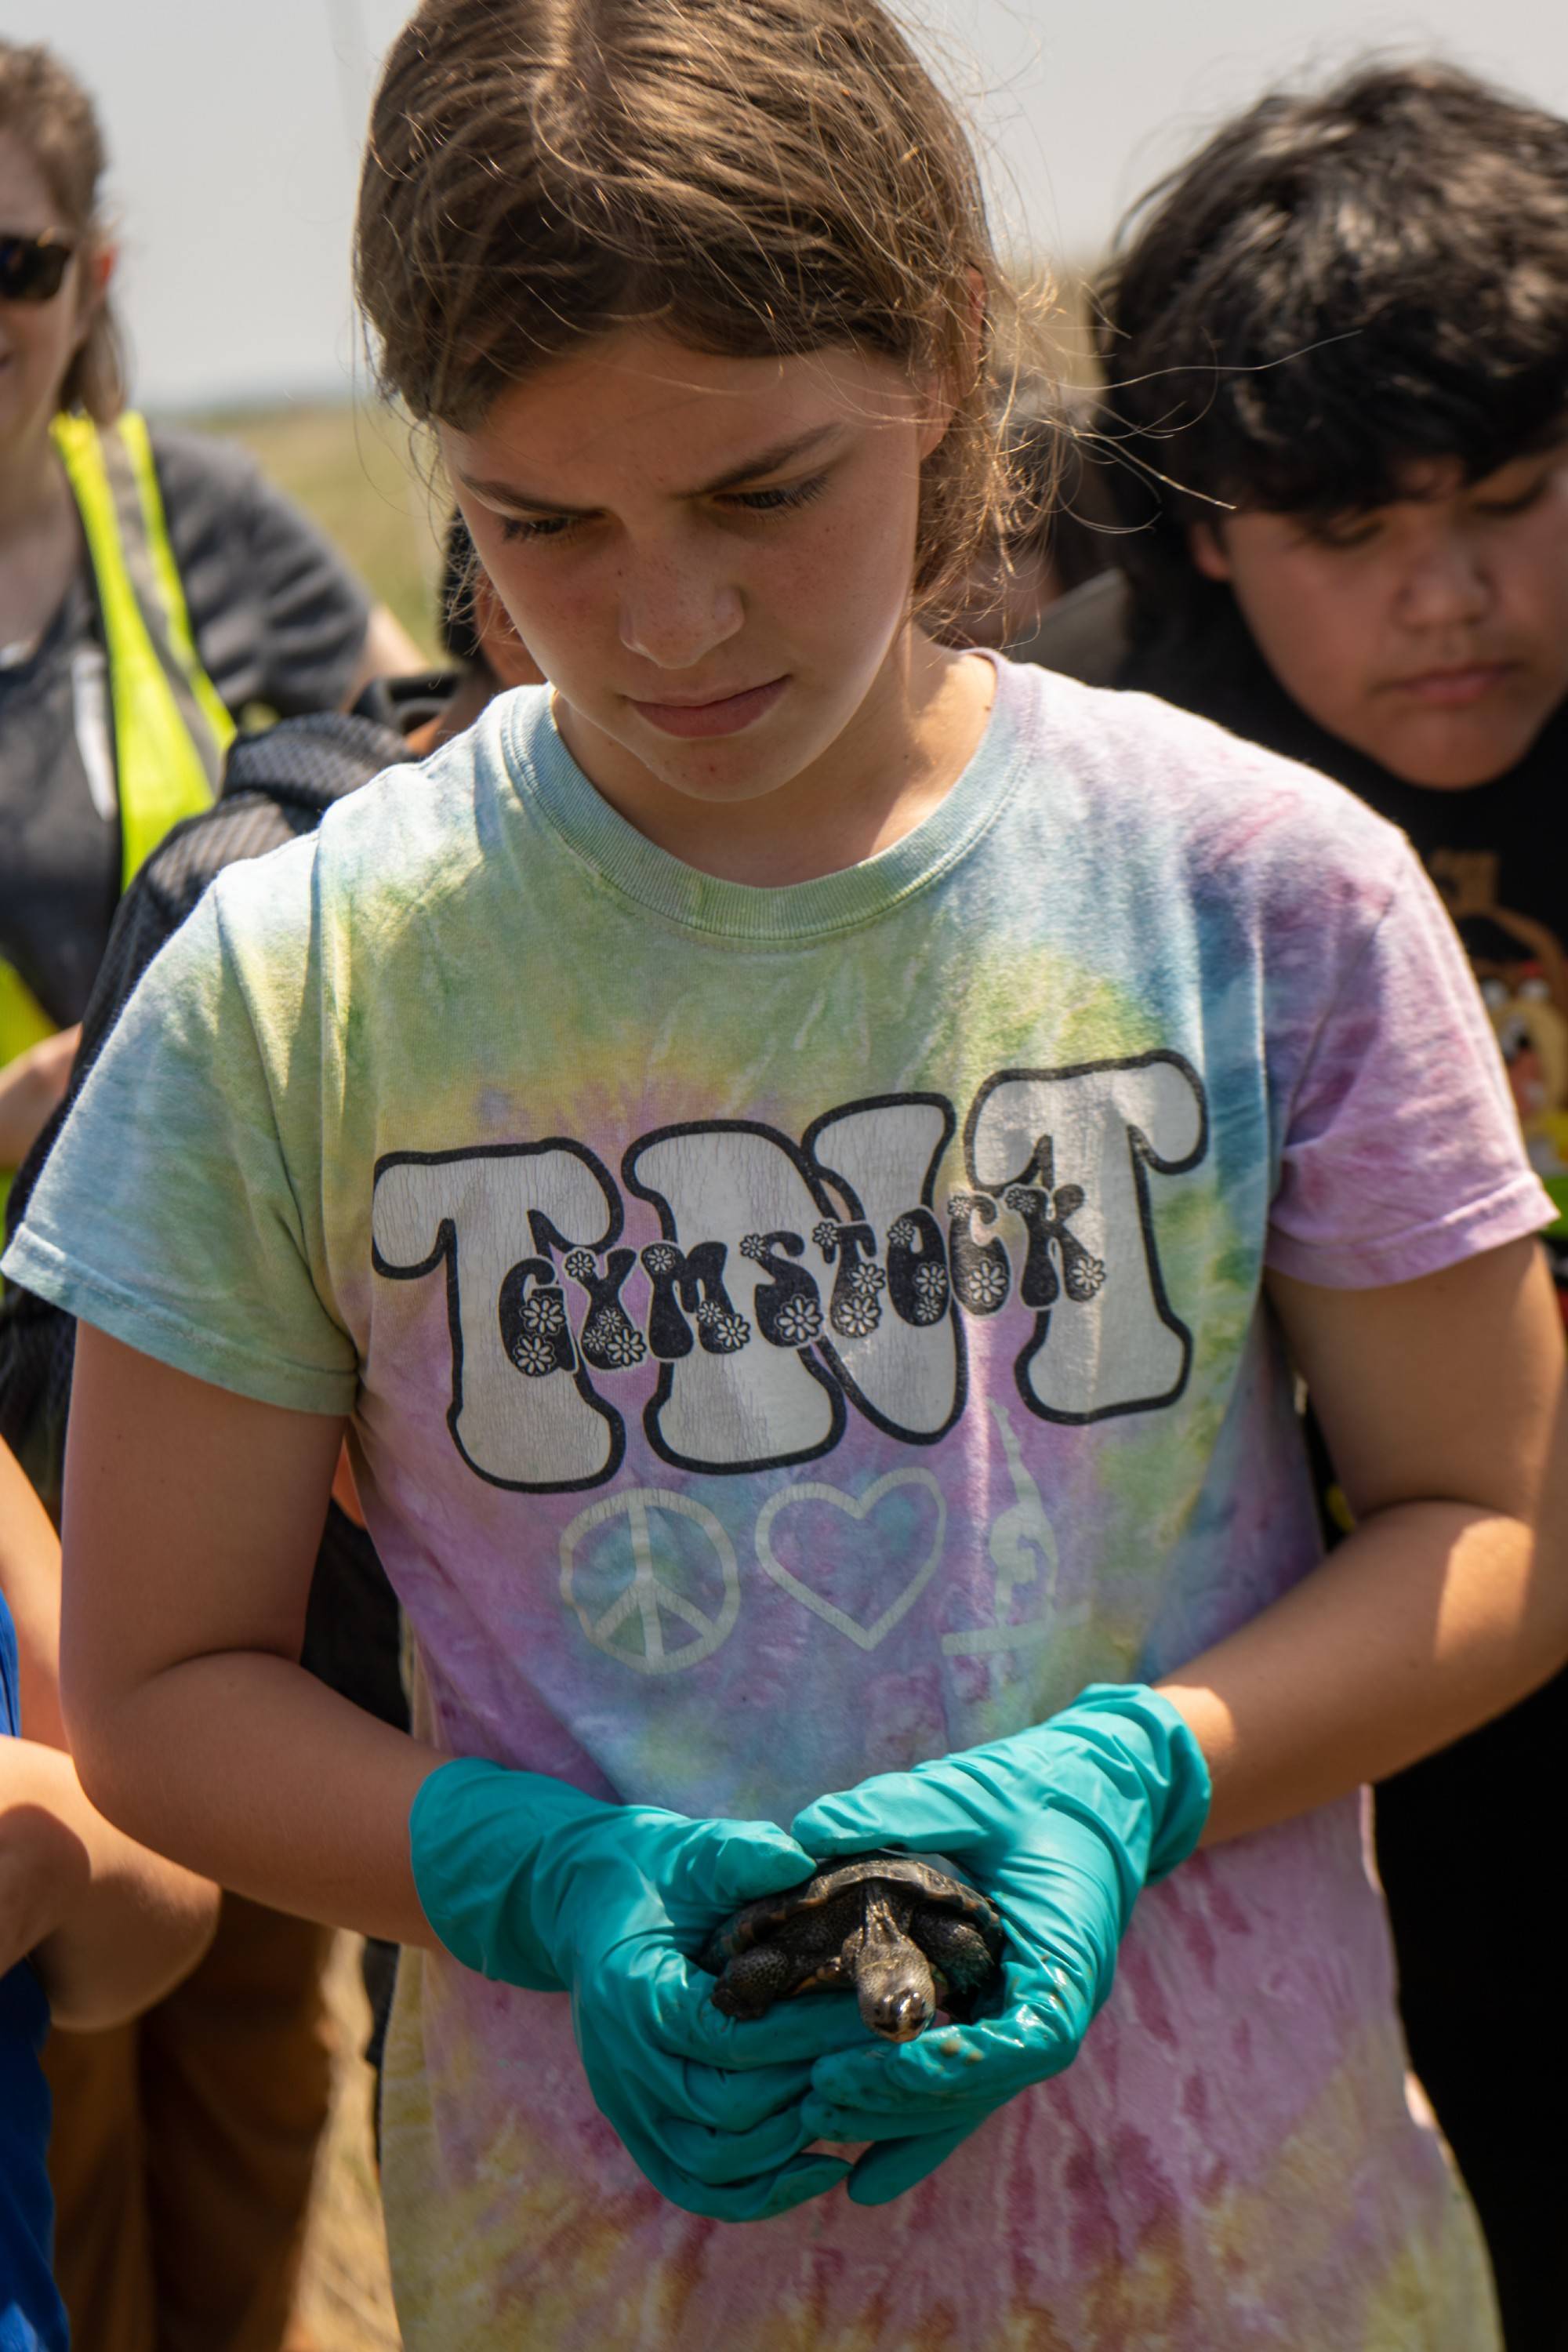 The turtles raised in classrooms grow to the size of 2-3 year old wild juvenile terrapins in just nine months under the care of K-12 students. Roosenberg and his students study the long term impacts of this on the turtle populations on Poplar Island.